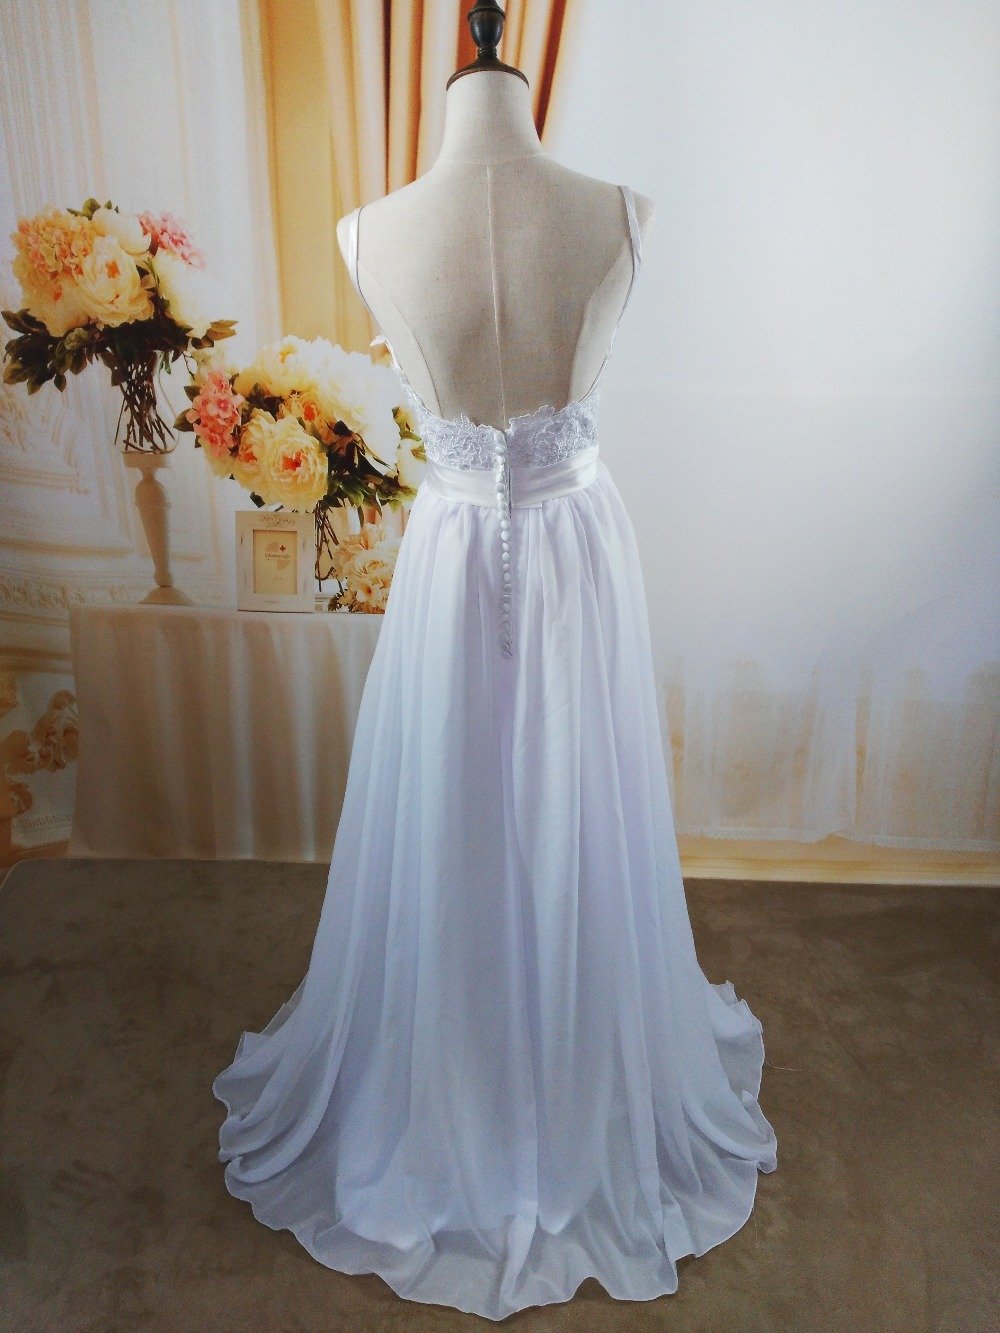 A-line wedding dress with-low back and spaghetti straps